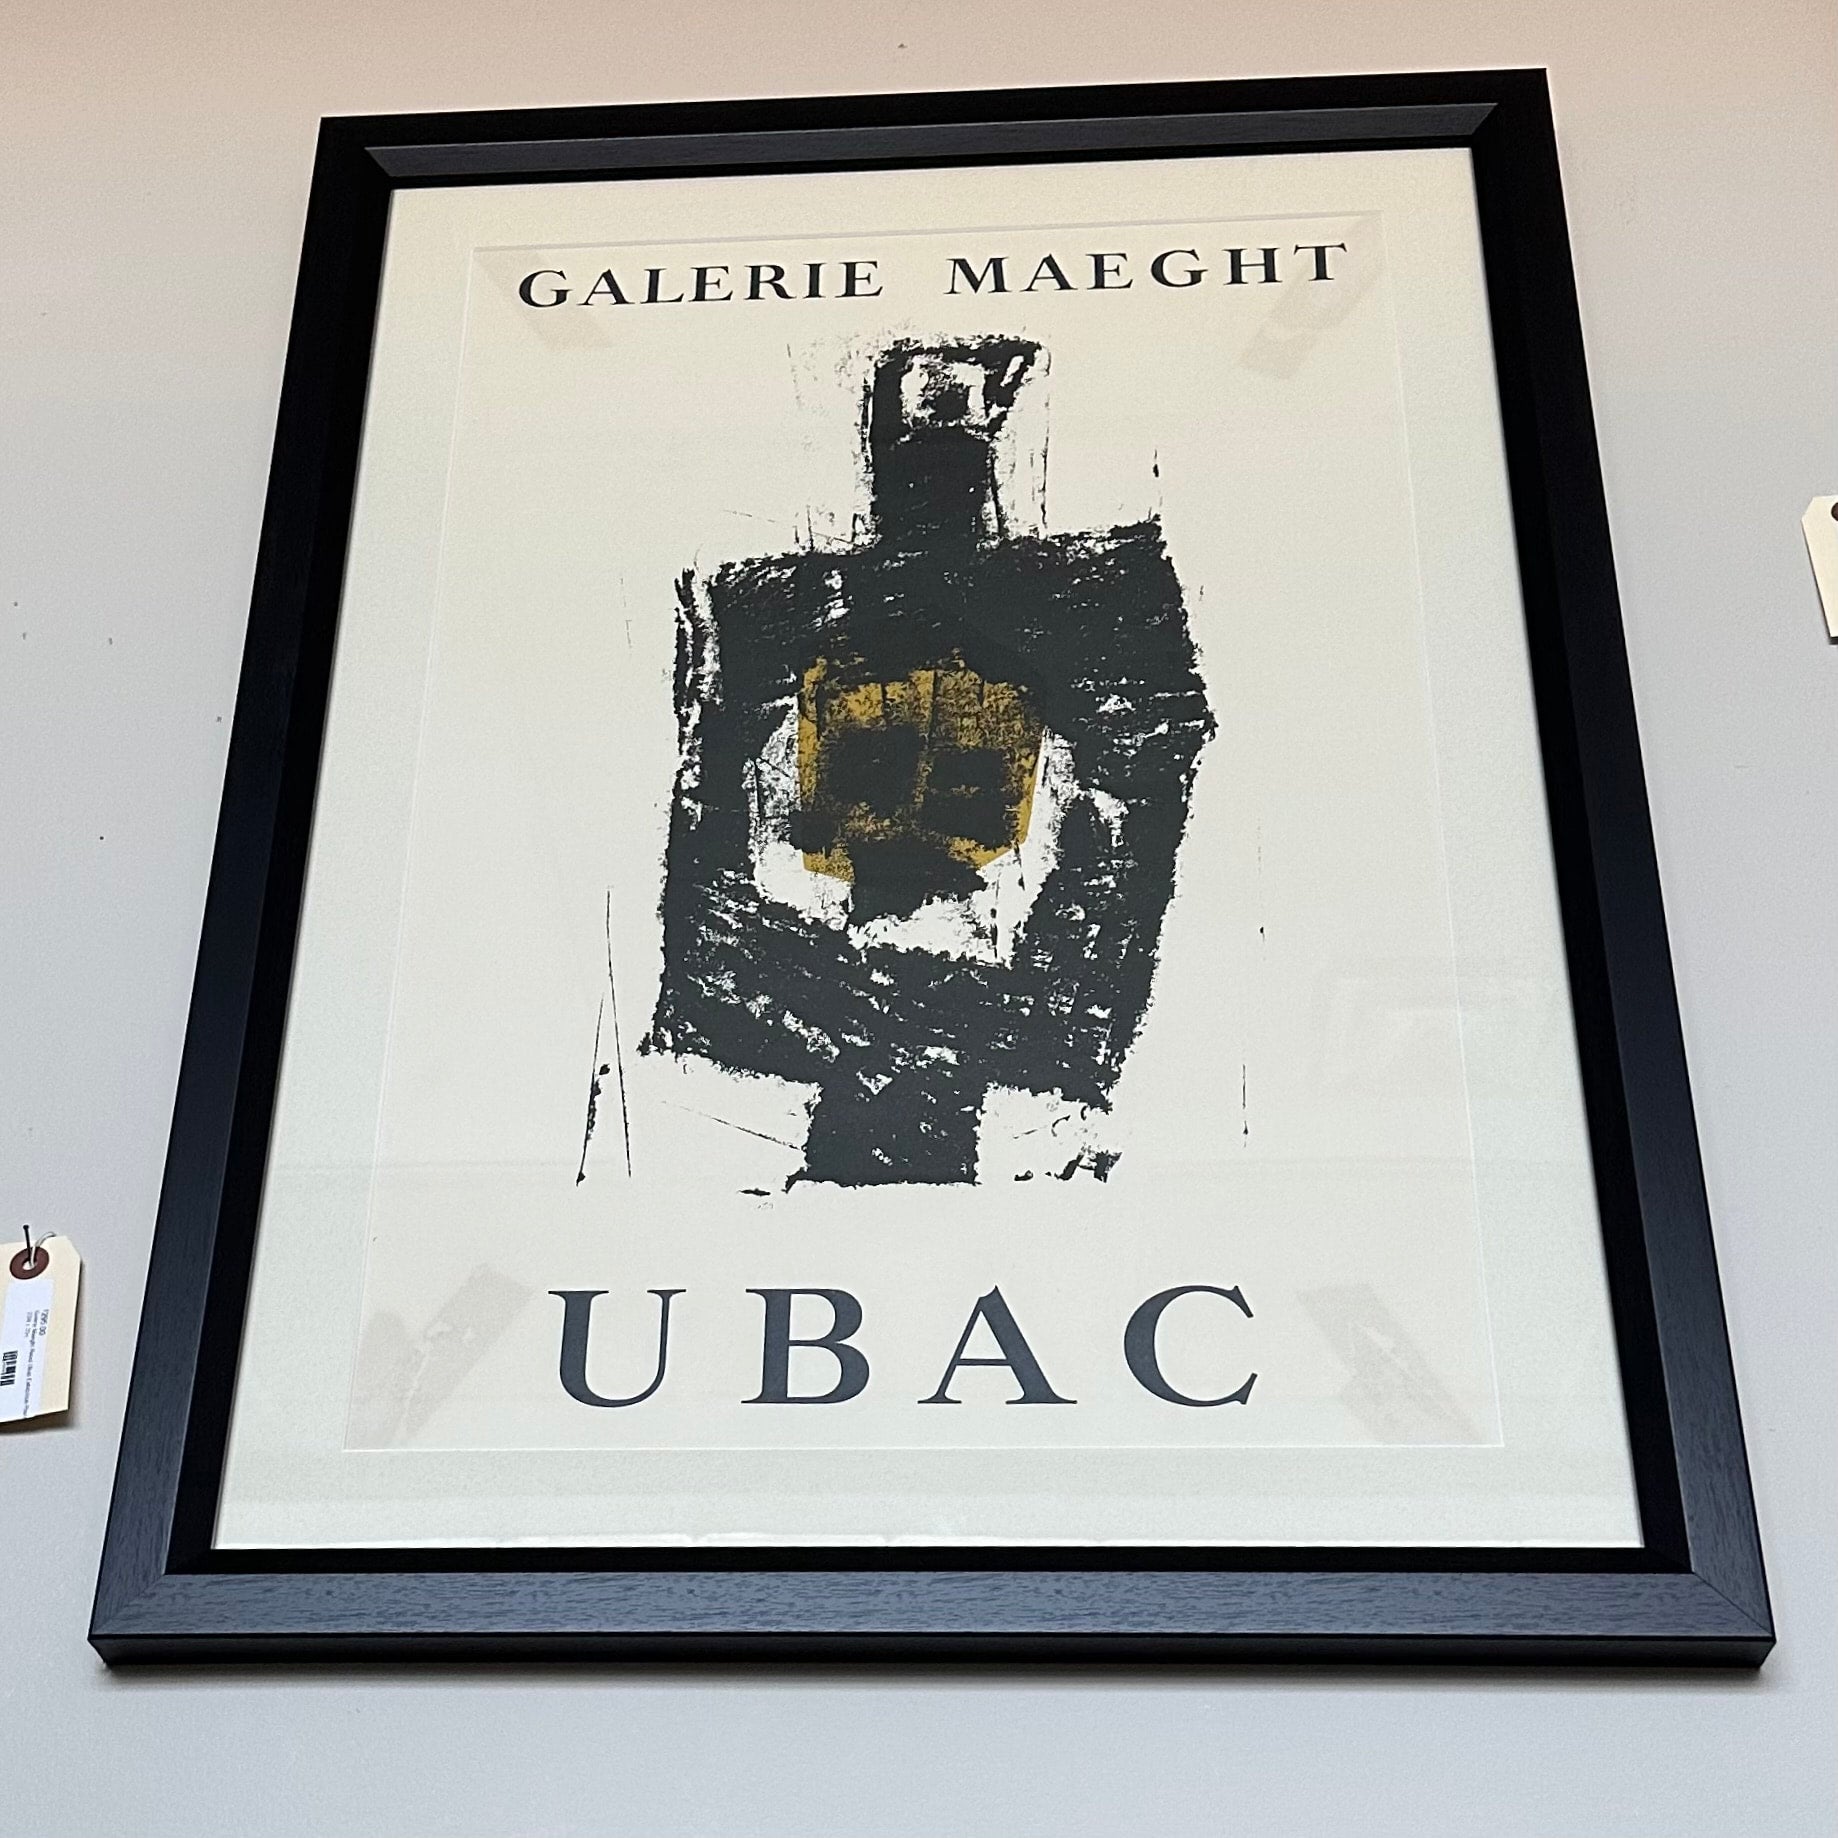 Tilbagebetale vegne basketball Galerie Maeght Raoul Ubac Exhibition Poster | Featuring antique, vintage,  and mid-century furnishings